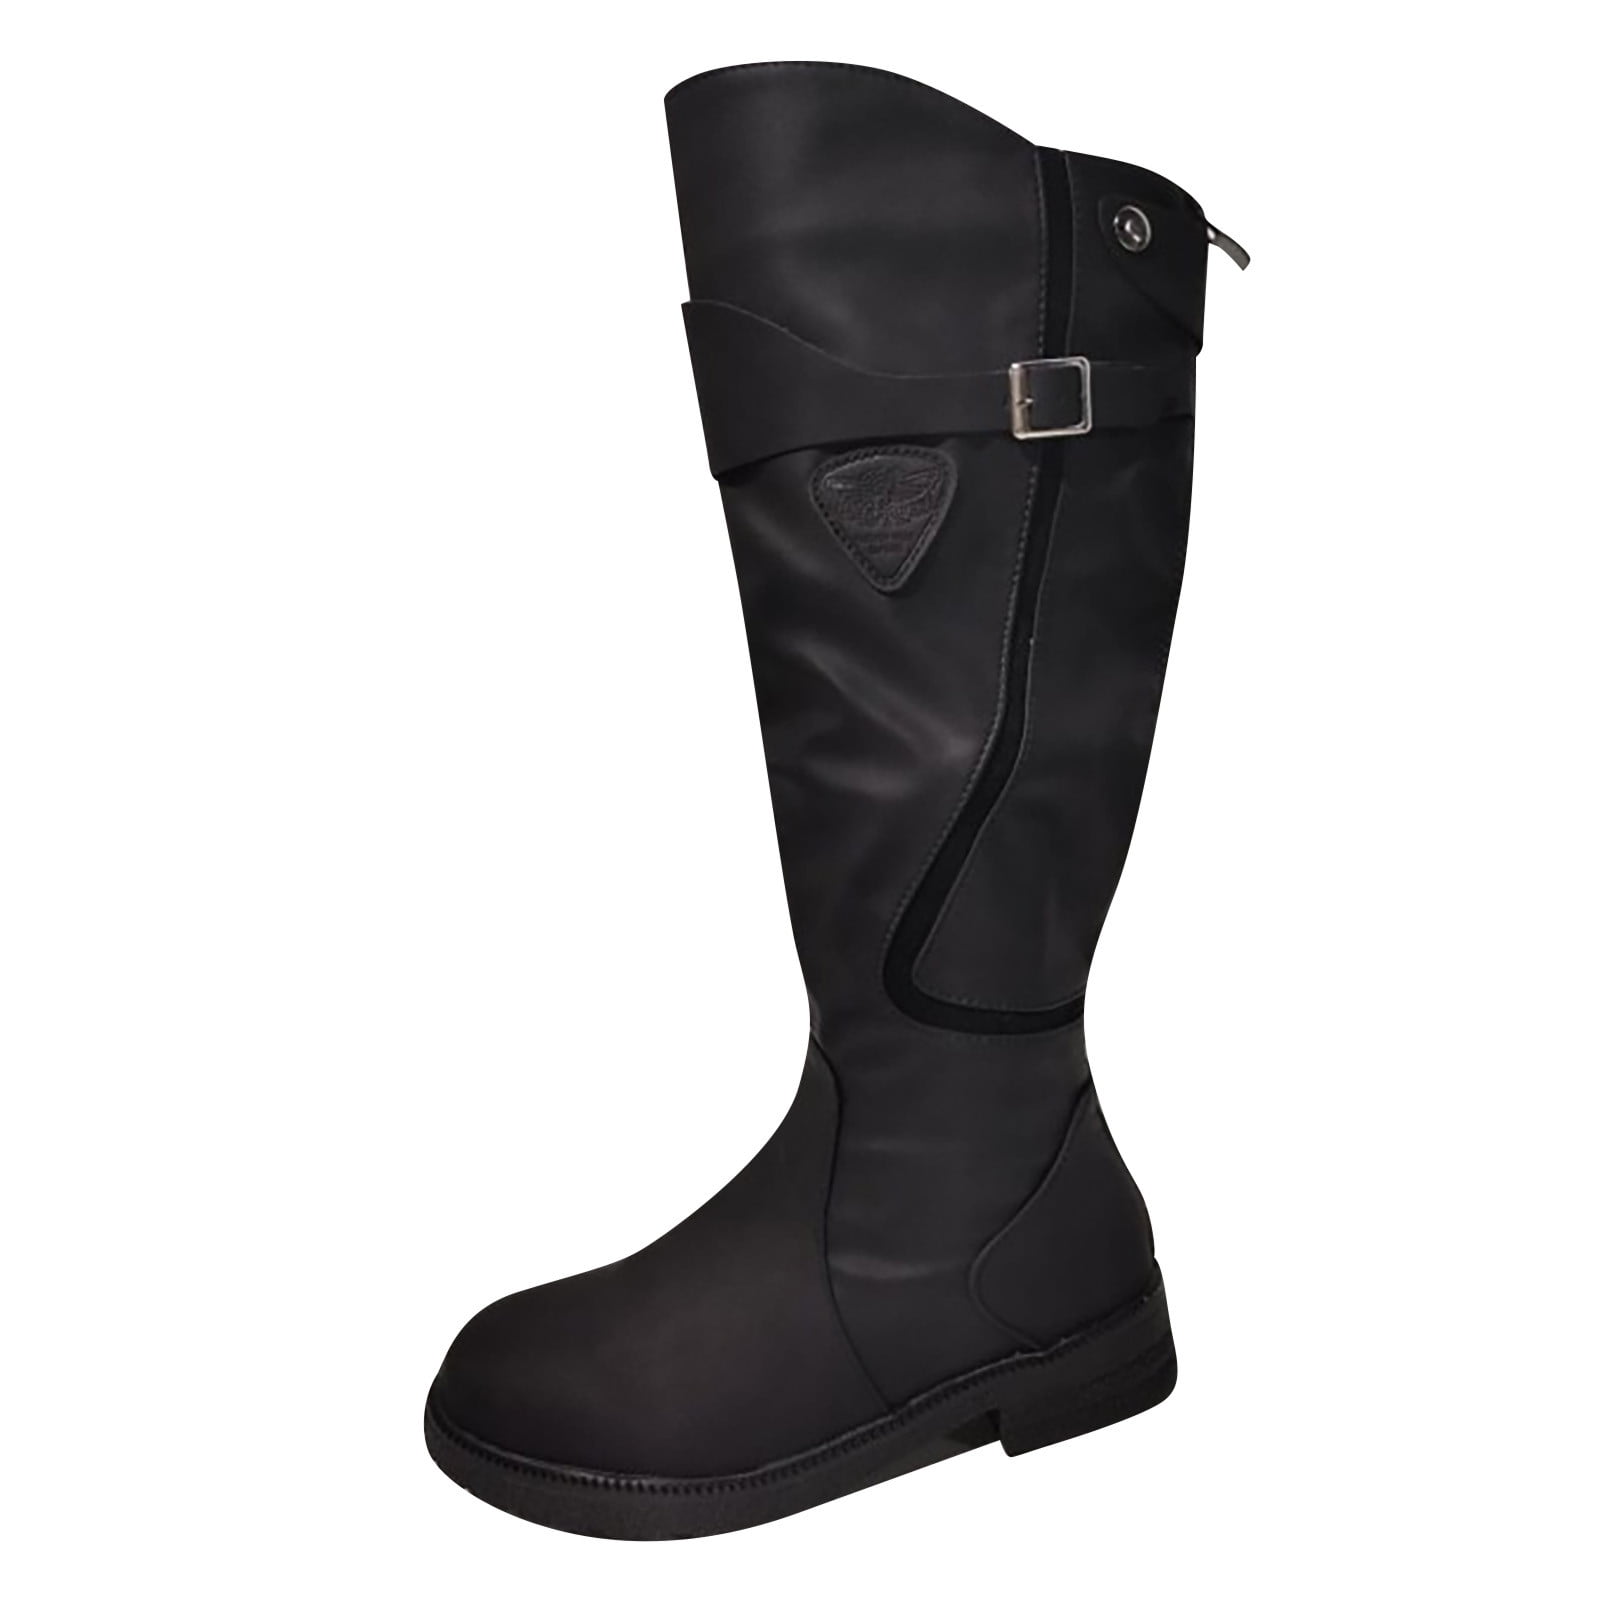 Tawop Black Leather Boots For Women, Fashion Riding Boots